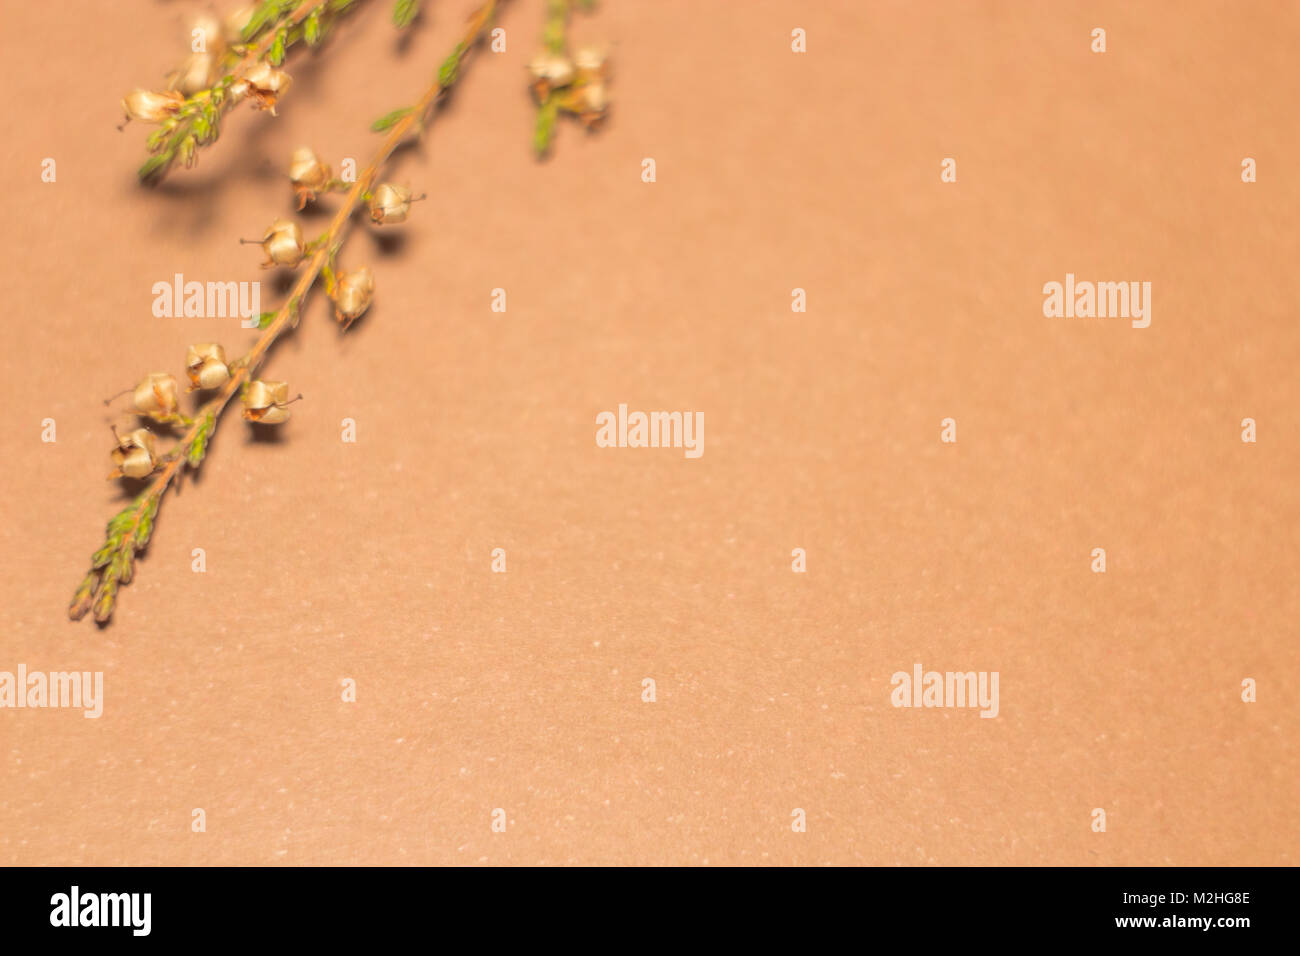 Design background from a dry branch of an unknown plant Stock Photo